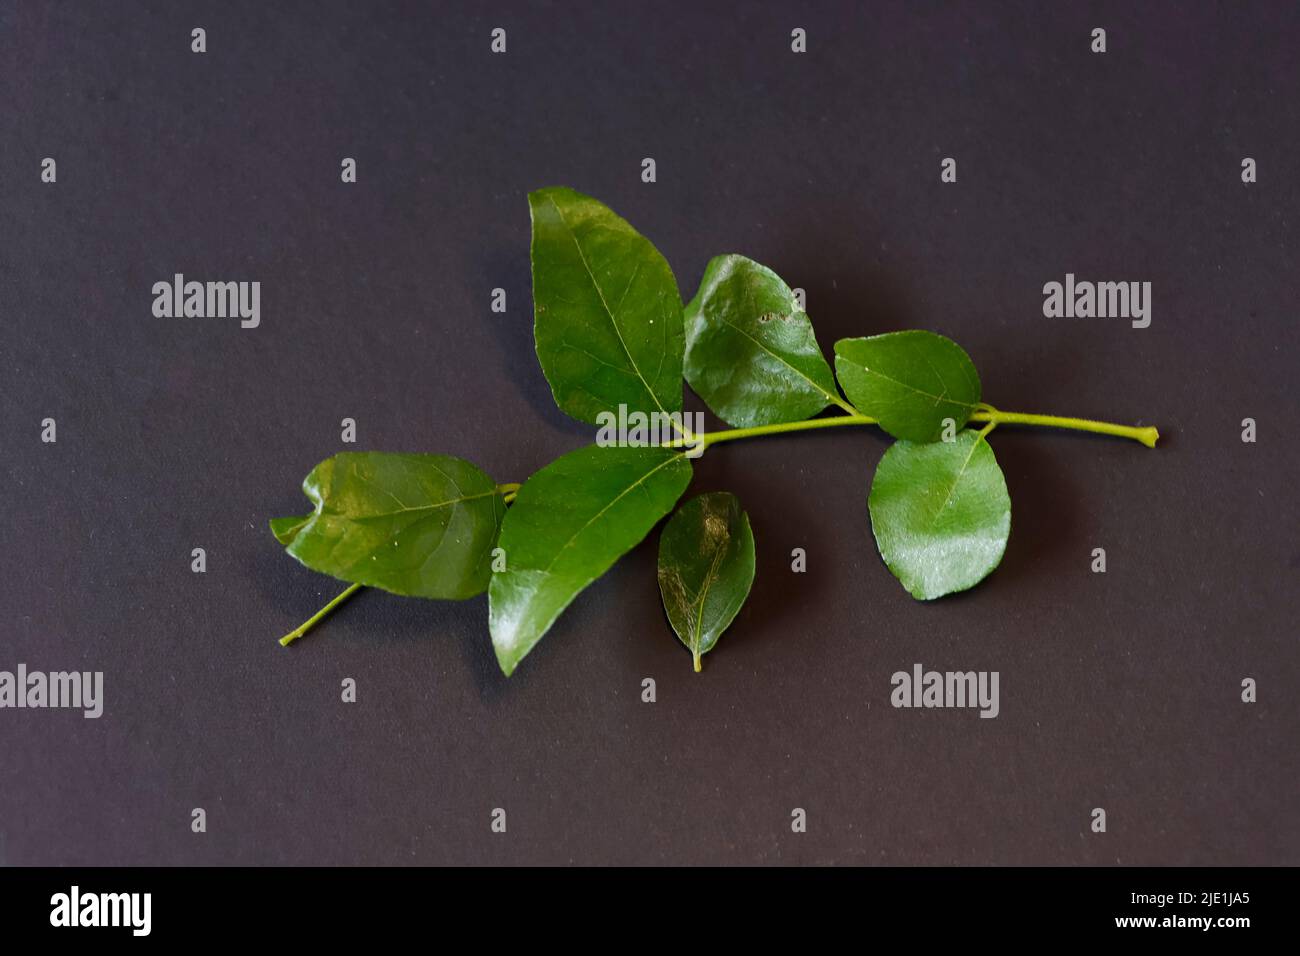 Closeup Image Of Curry Leaves In Black Background Stock Photo